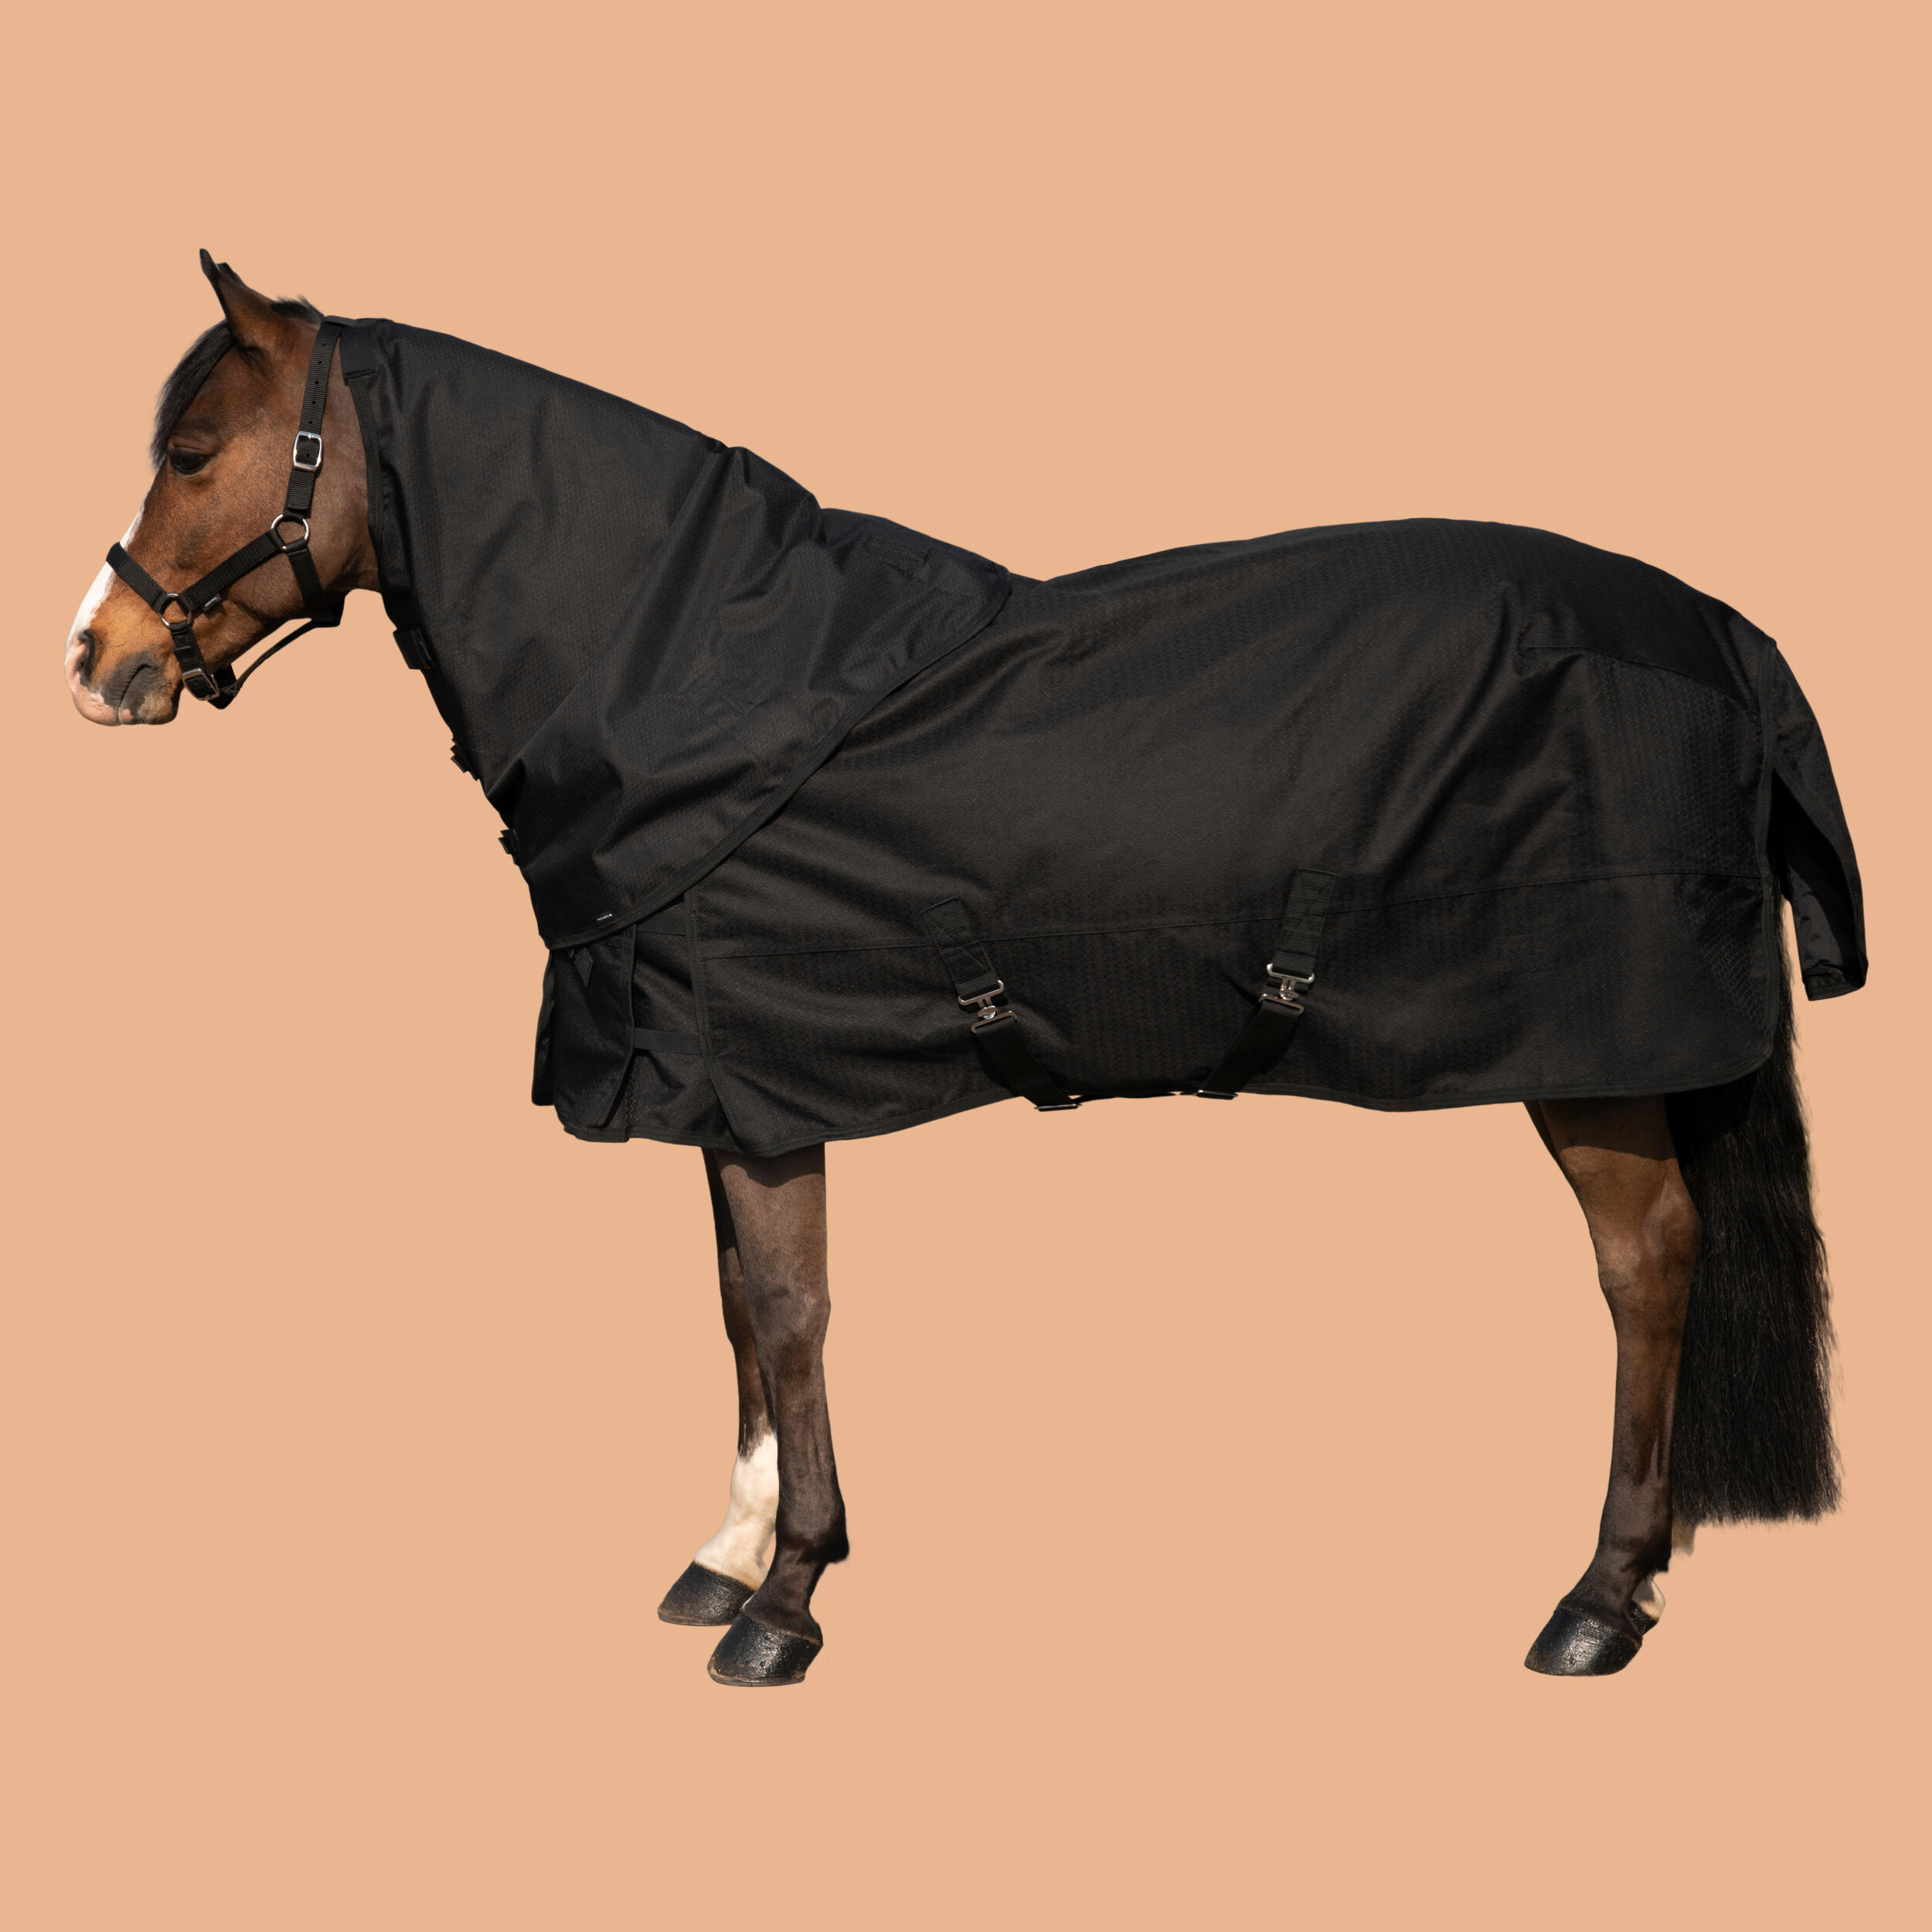 Horse Riding Waterproof Neck Cover Allweather Light - Black 7/7